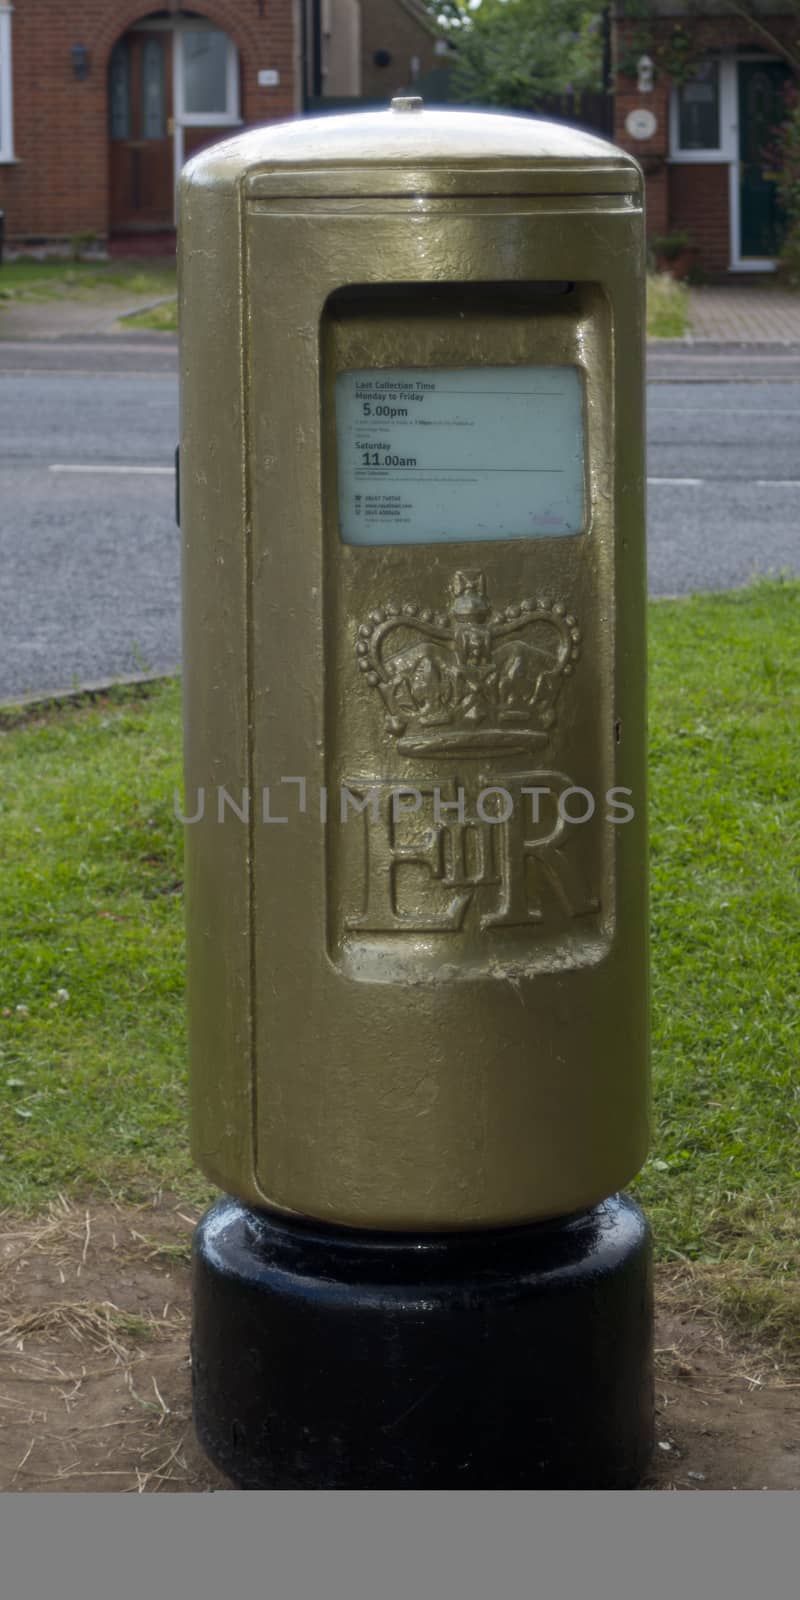 STOTFOLD, BEDFORDSHIRE, UK - AUGUST 8: Golden Postbox to commemorate Victoria Pendleton's Keirin Cycling Gold Medal at London 2012 Olympics on 3 August 2012